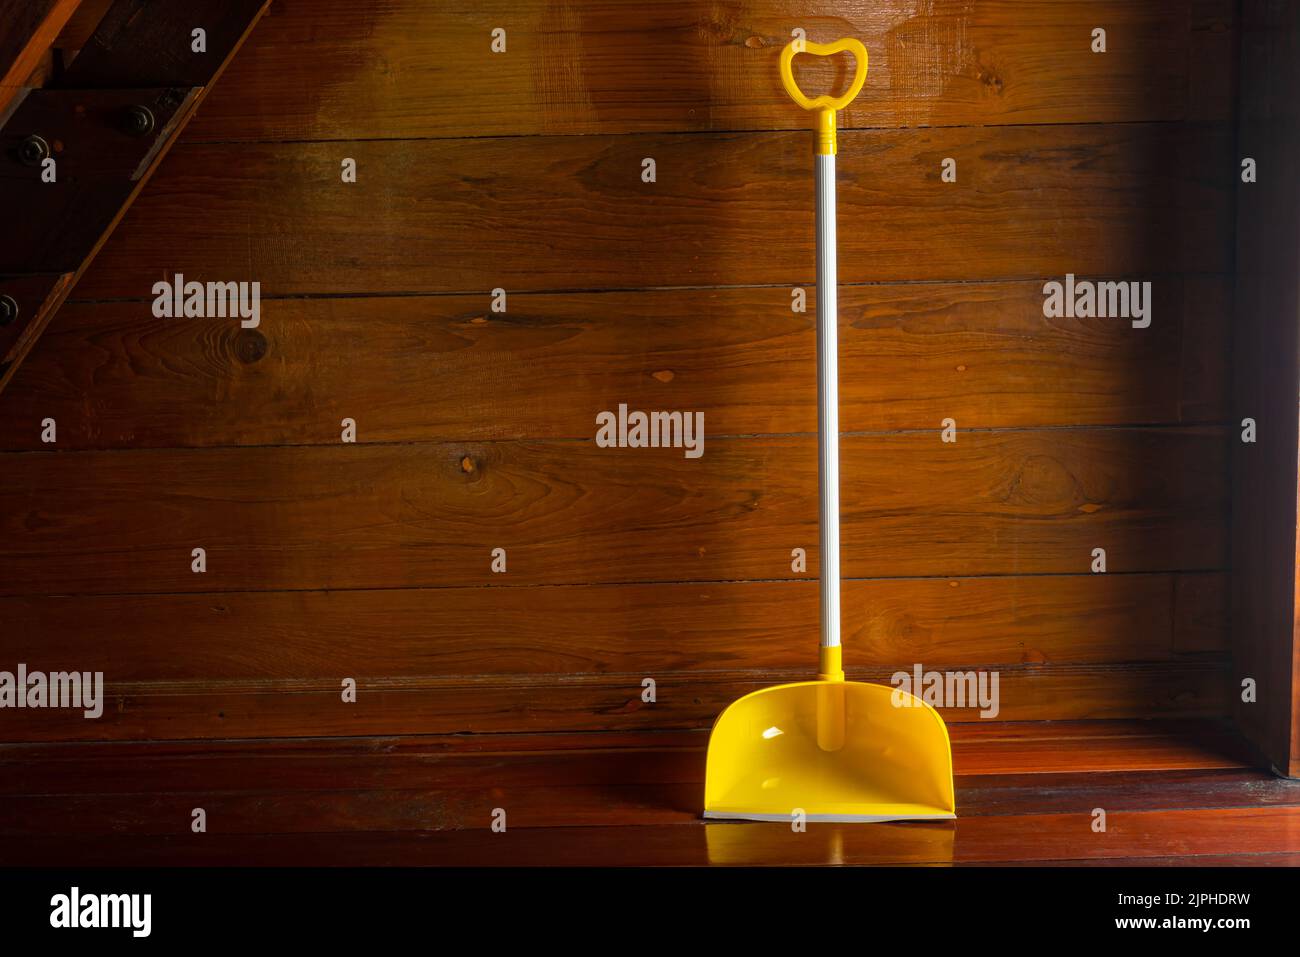 Long handle plastic yellow dustpan leaning against wooden wall on a wooden floor in a room. Stock Photo